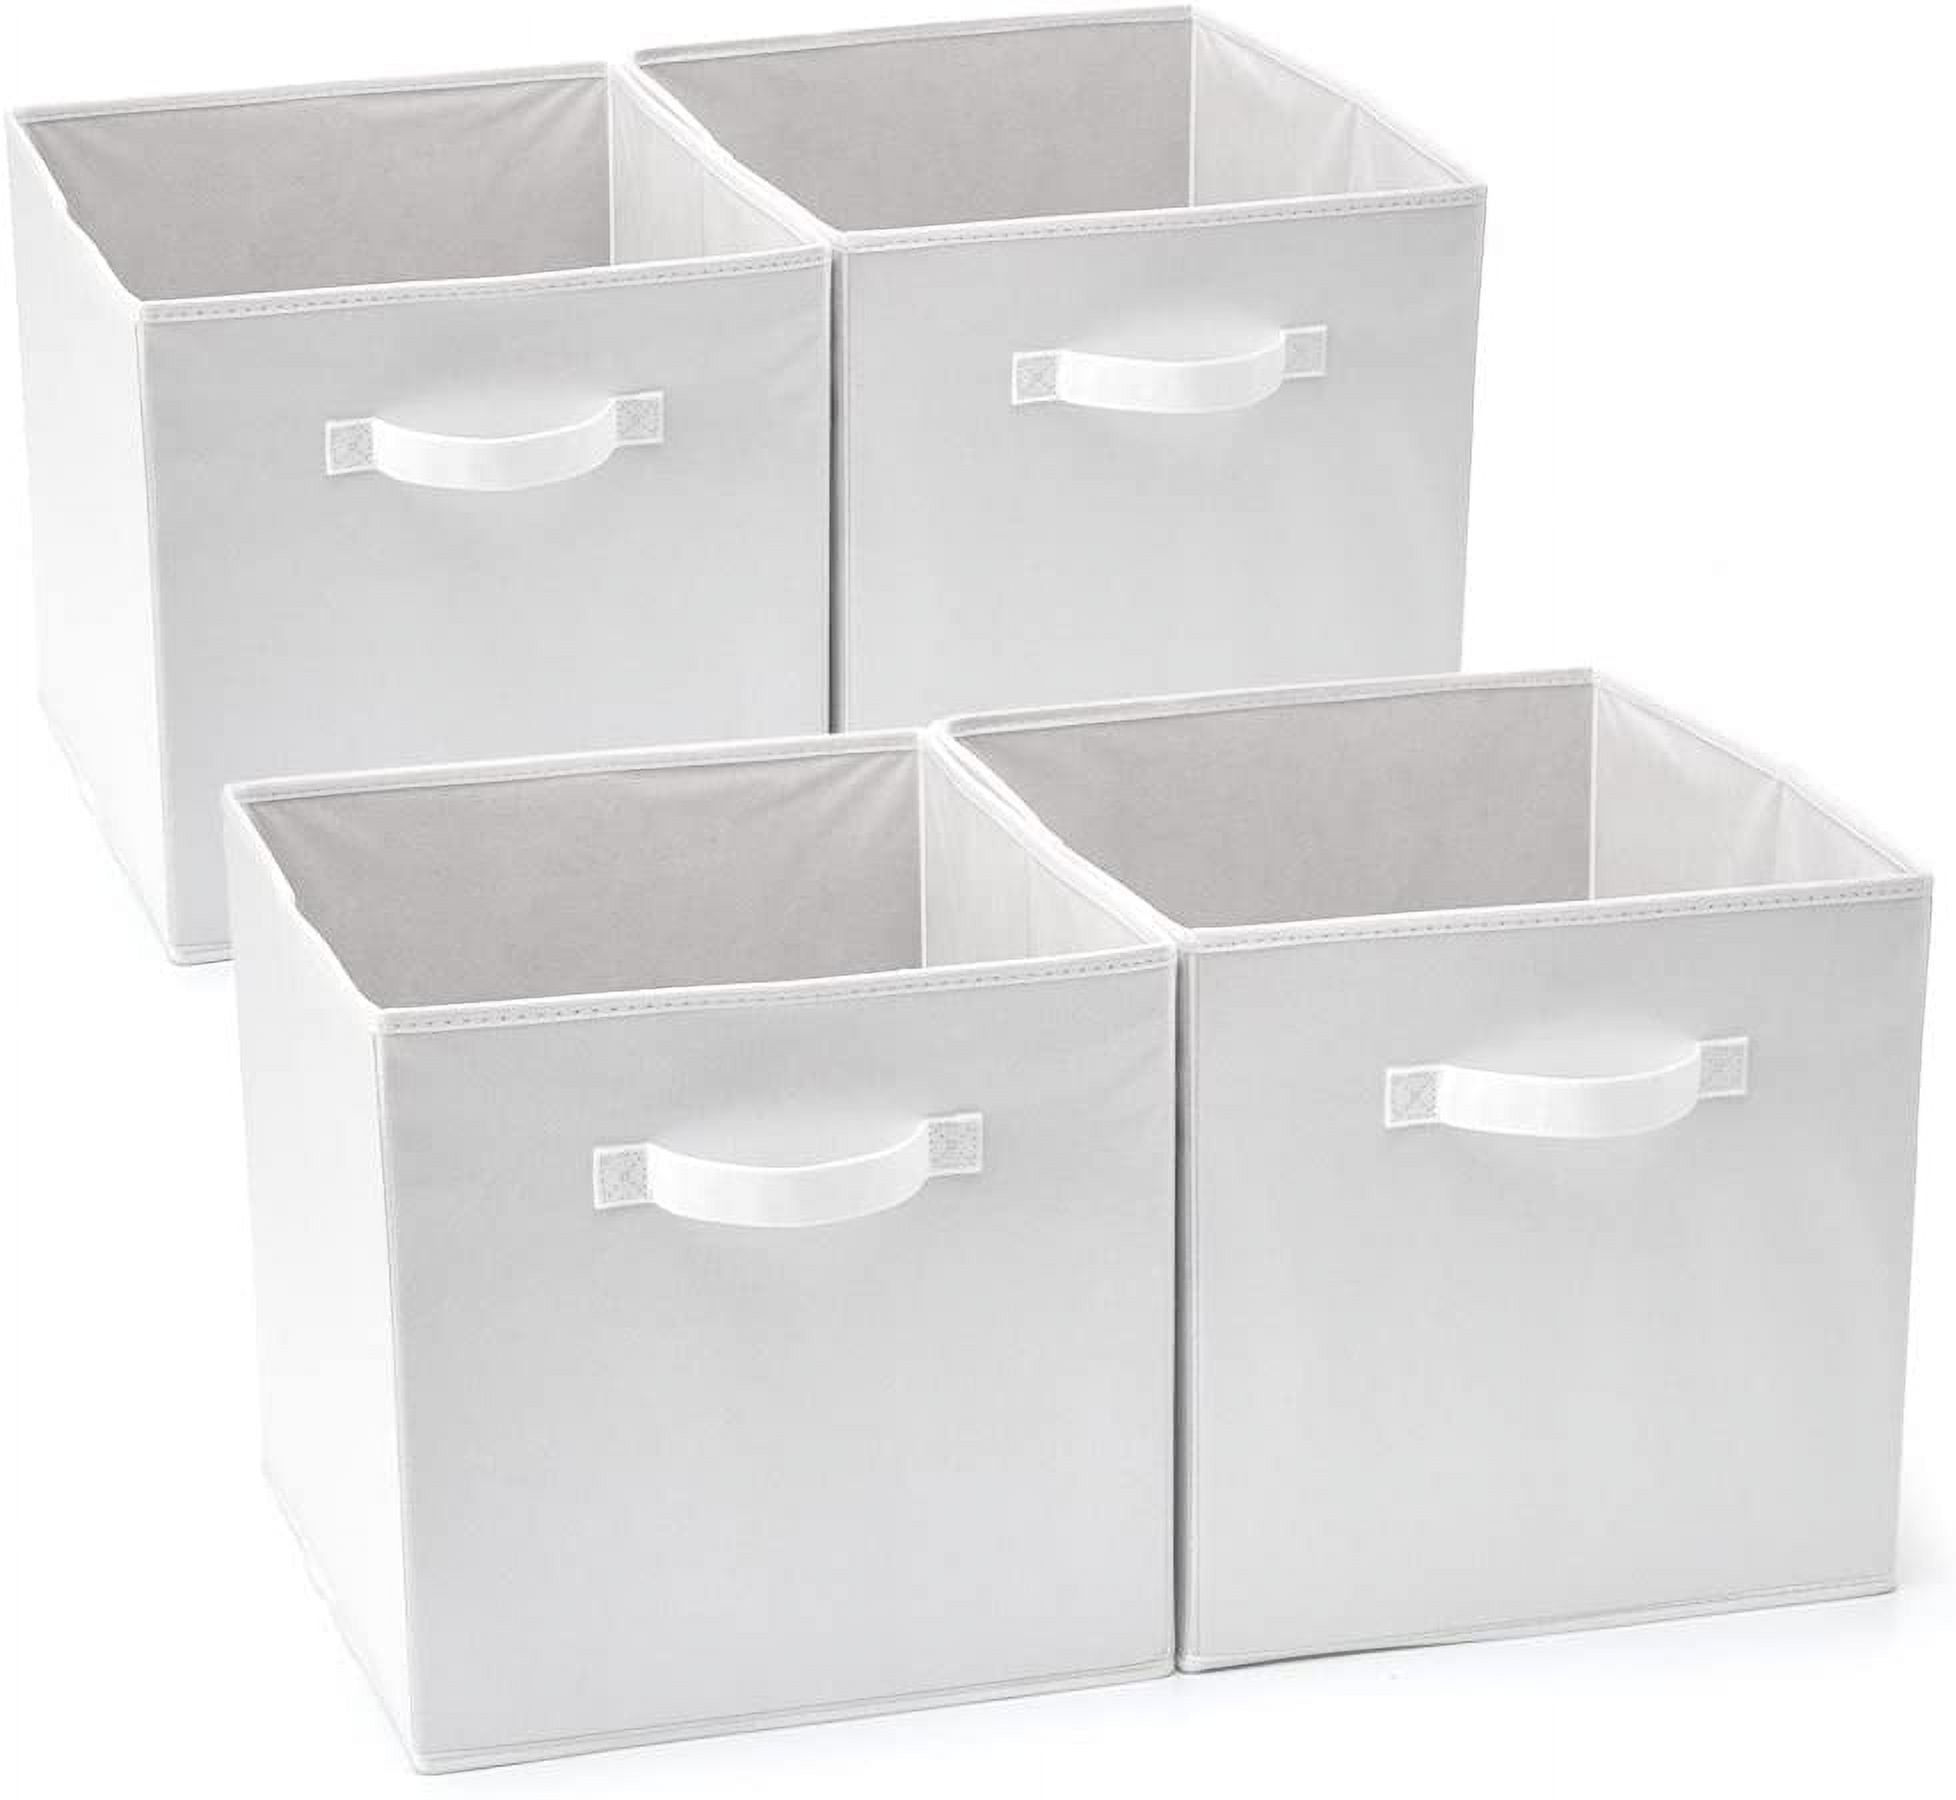 Techvida 6 Pack Fabric Storage Cubes with Handle, Foldable 11x11